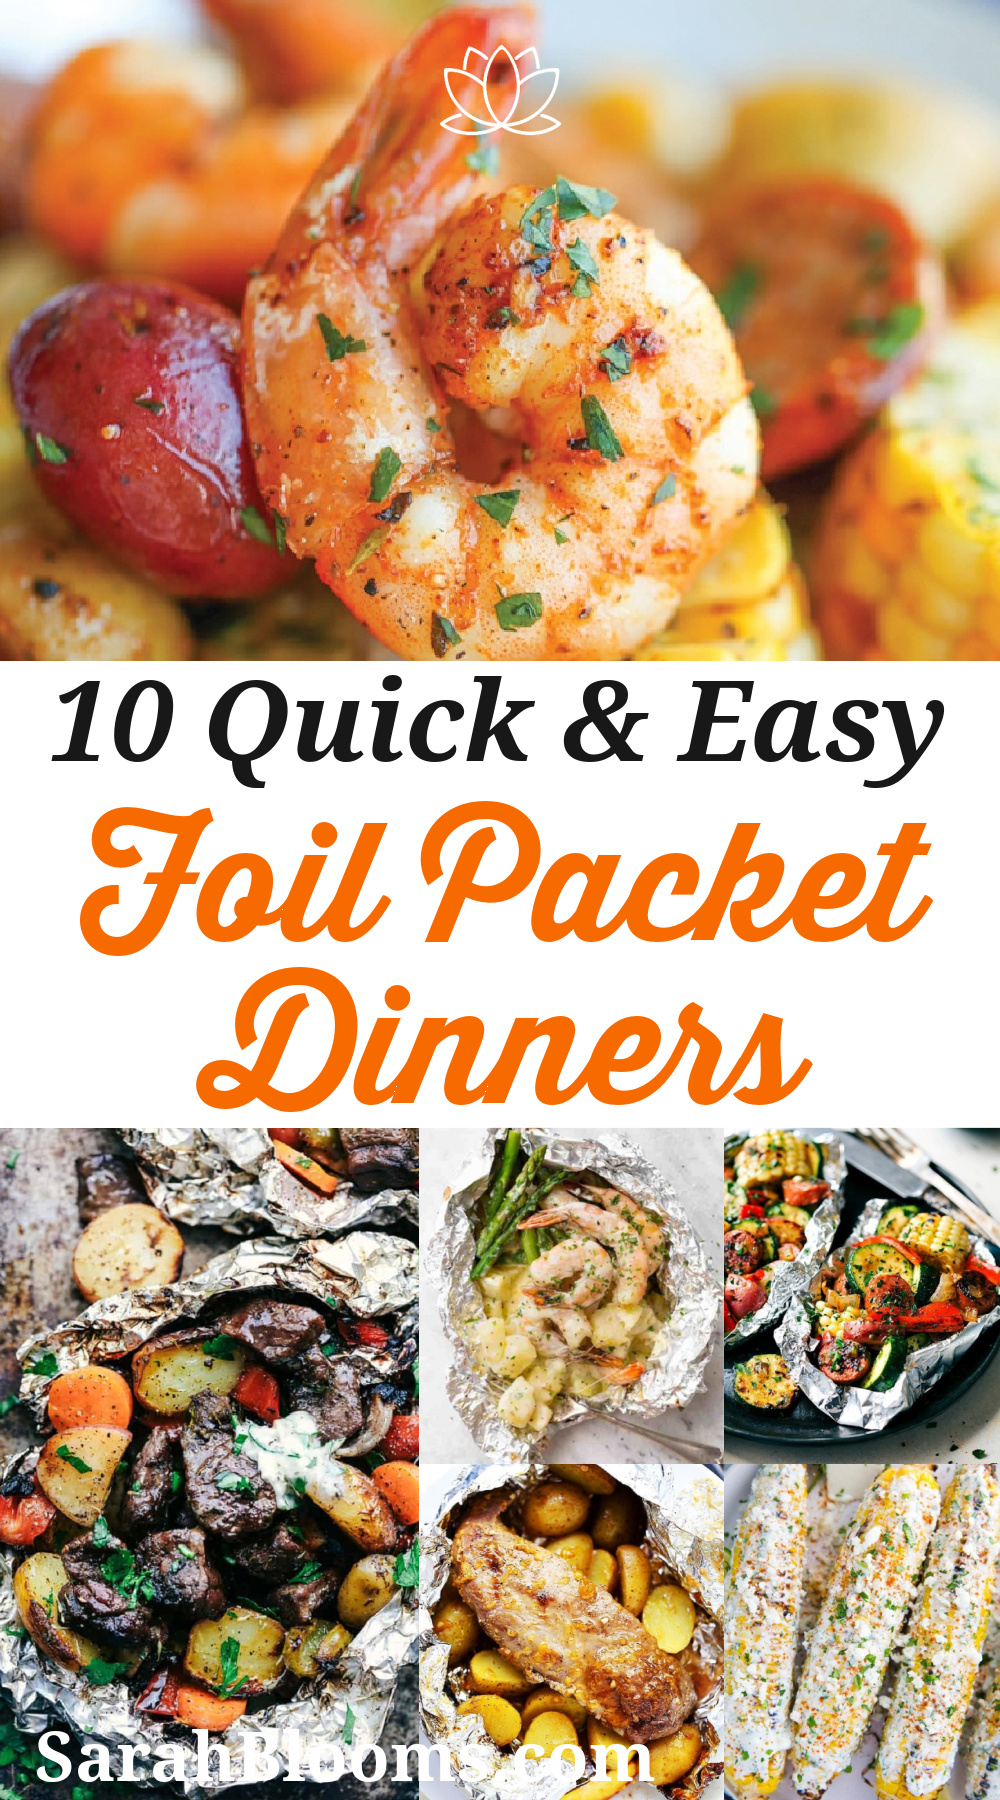 These Mouthwatering Foil Pack Recipes will help you eat great any night of the week - even when you're super busy! Put a healthy, satisfying meal on the table any night of the week with these 10 Best Foil Packet Dinners your whole family will love! #foilpacketmeals #foilpacketdinners #foilpackrecipes #quickmeals #weeknightmeals 